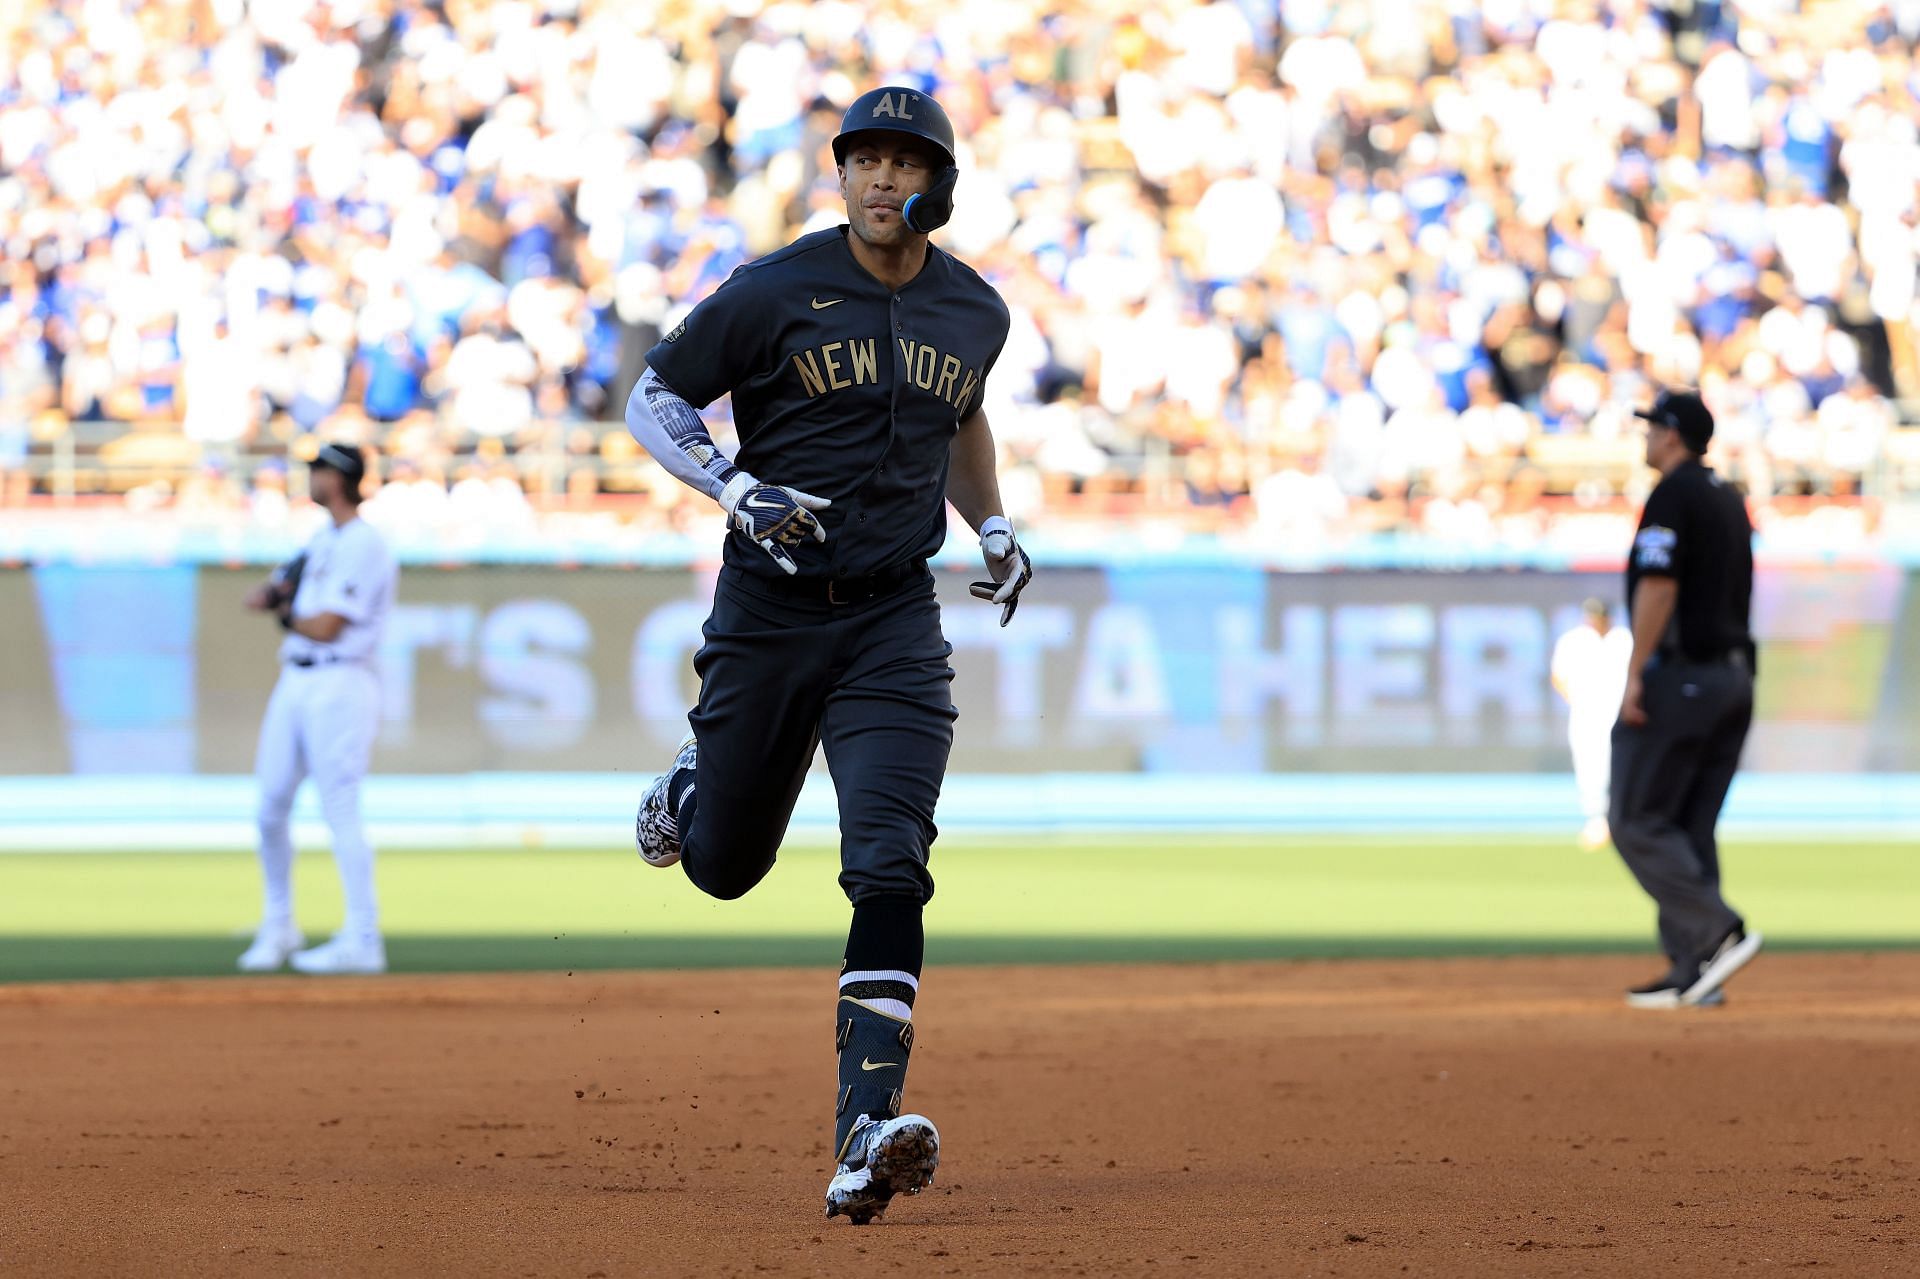 New York Yankees' Giancarlo Stanton rounds the bases after hitting